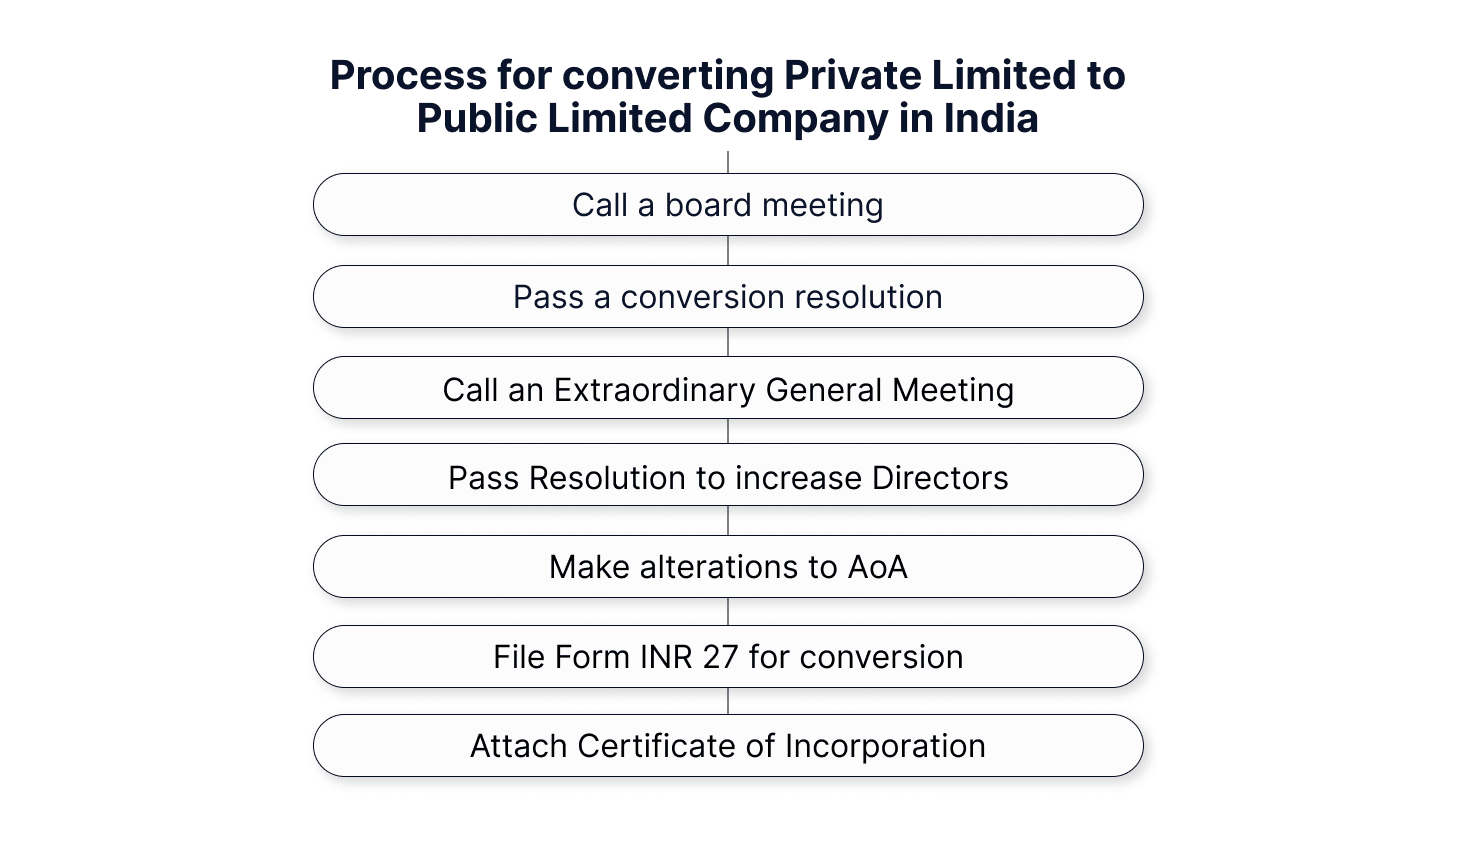 Process for converting Private Limited to Public Limited Company in India